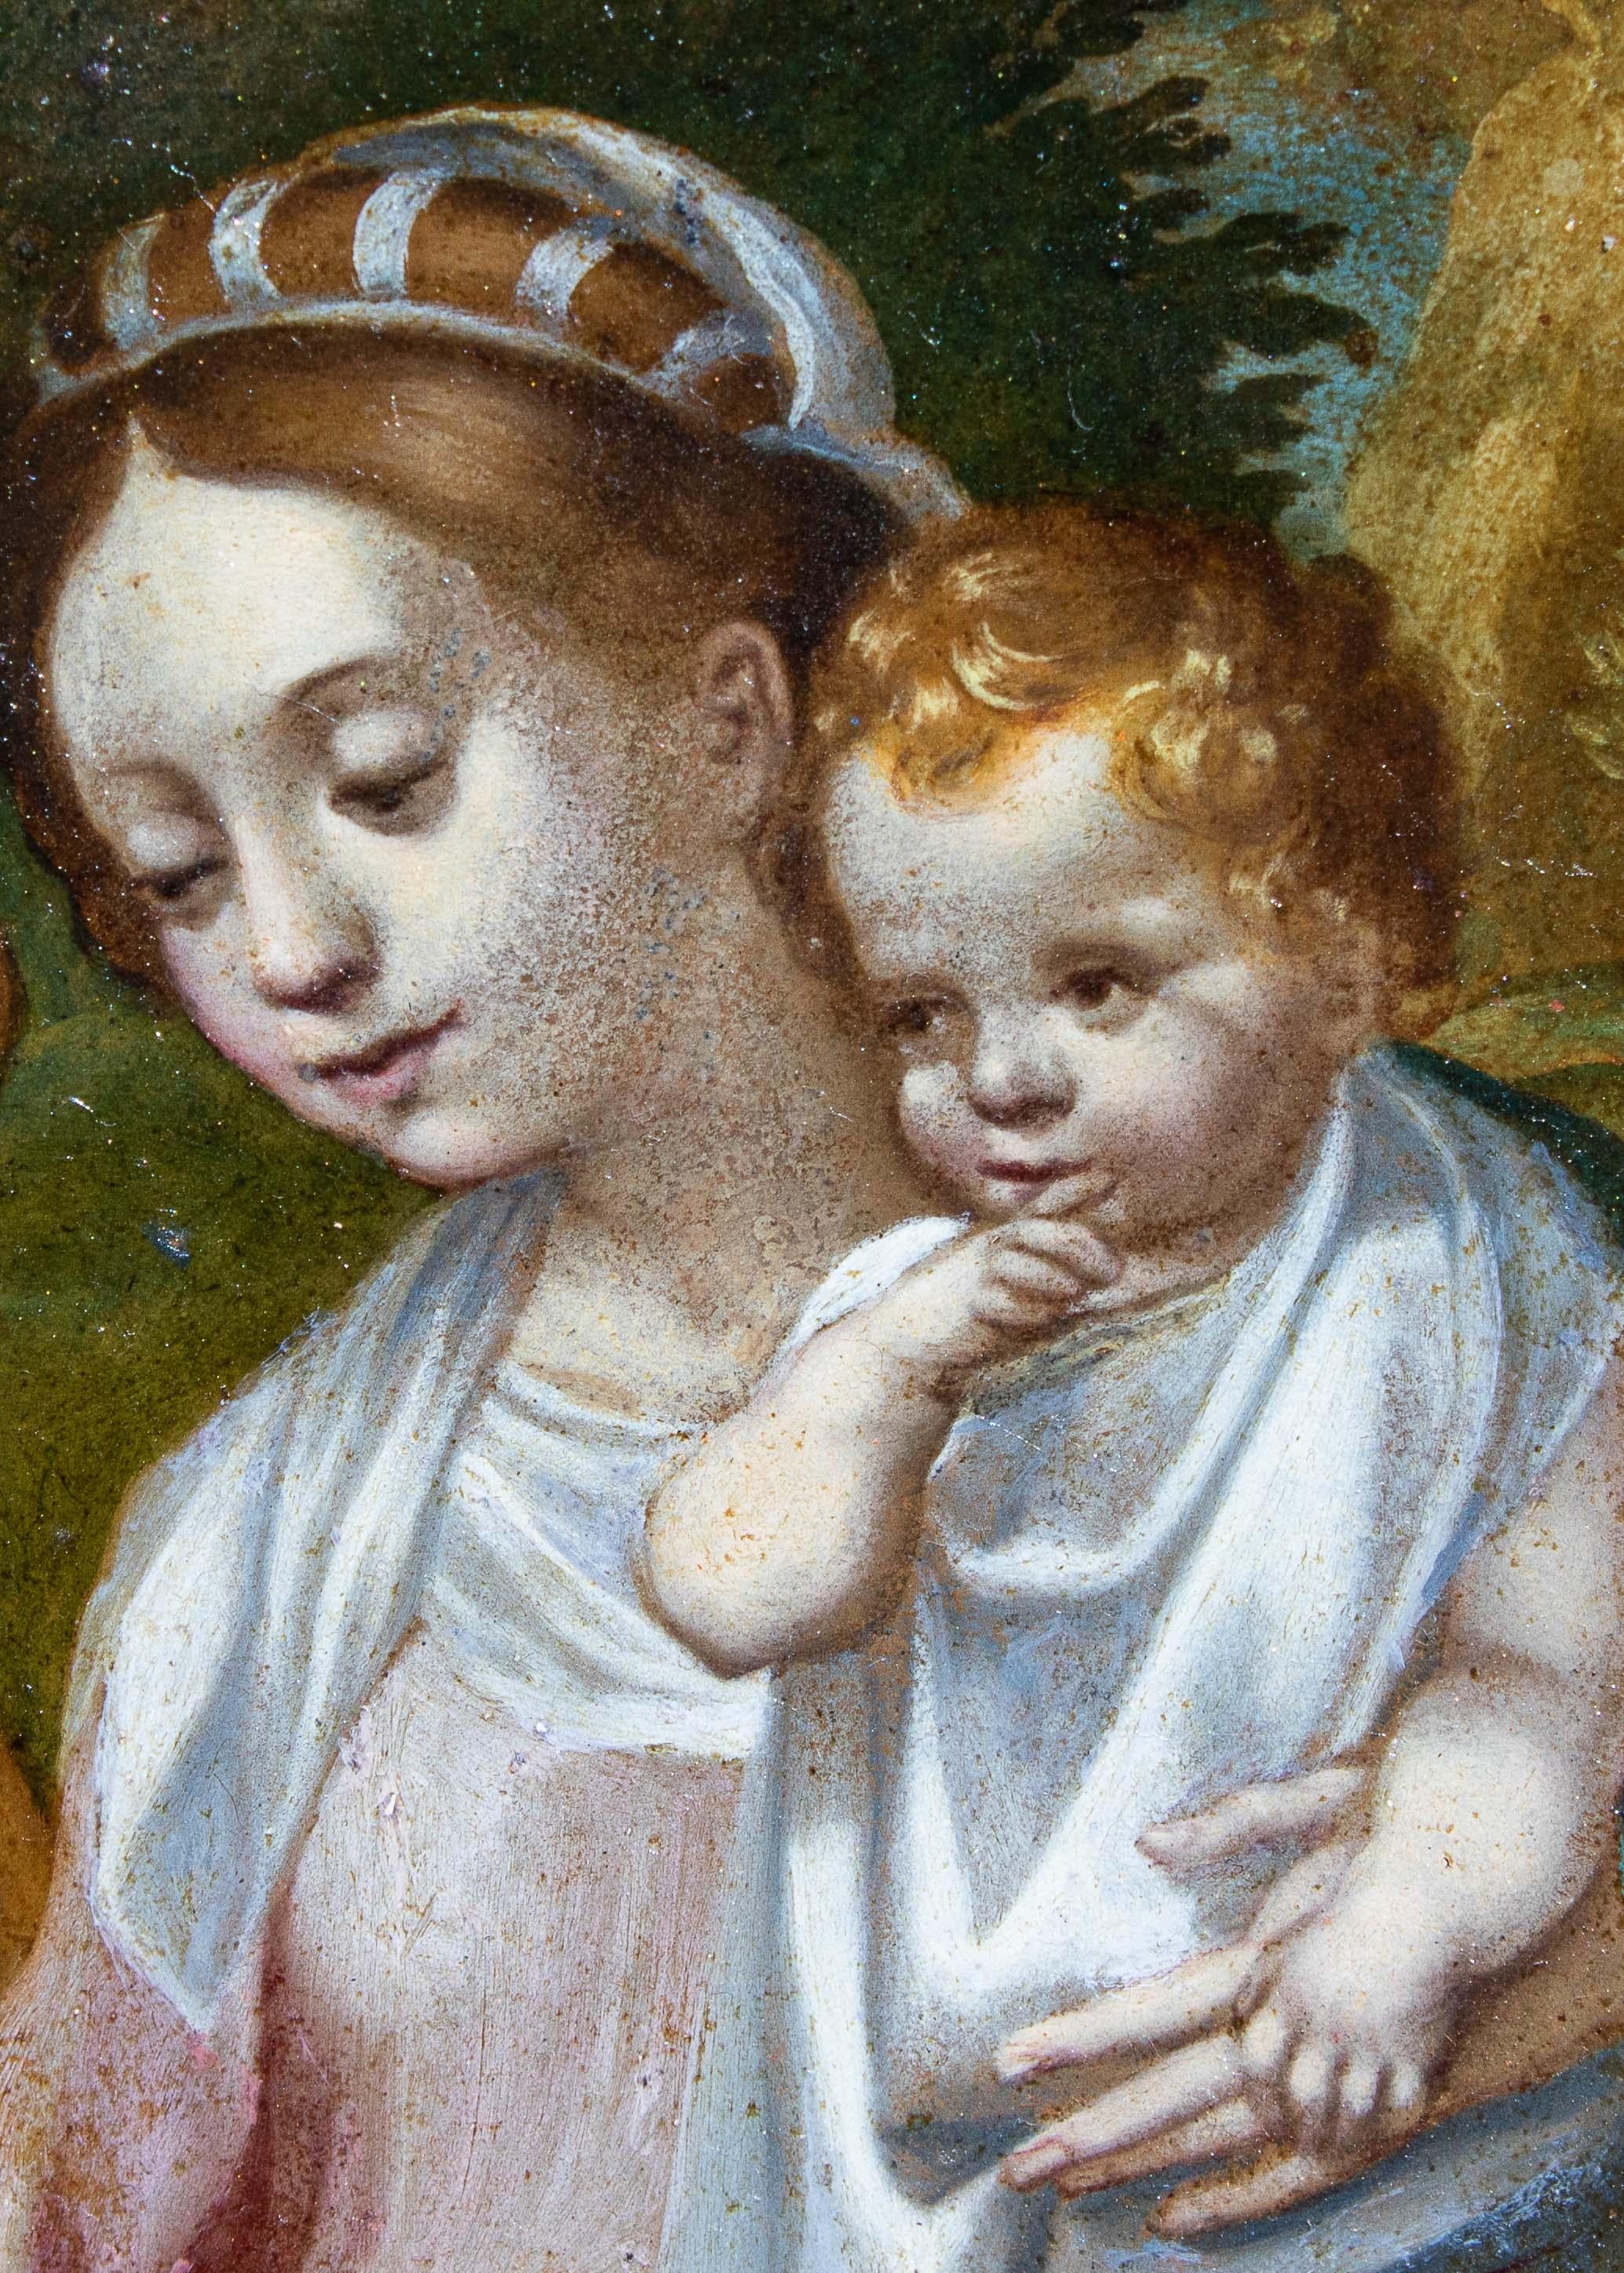 Italian 17th Century Madonna with Child Painting Oil on Copper